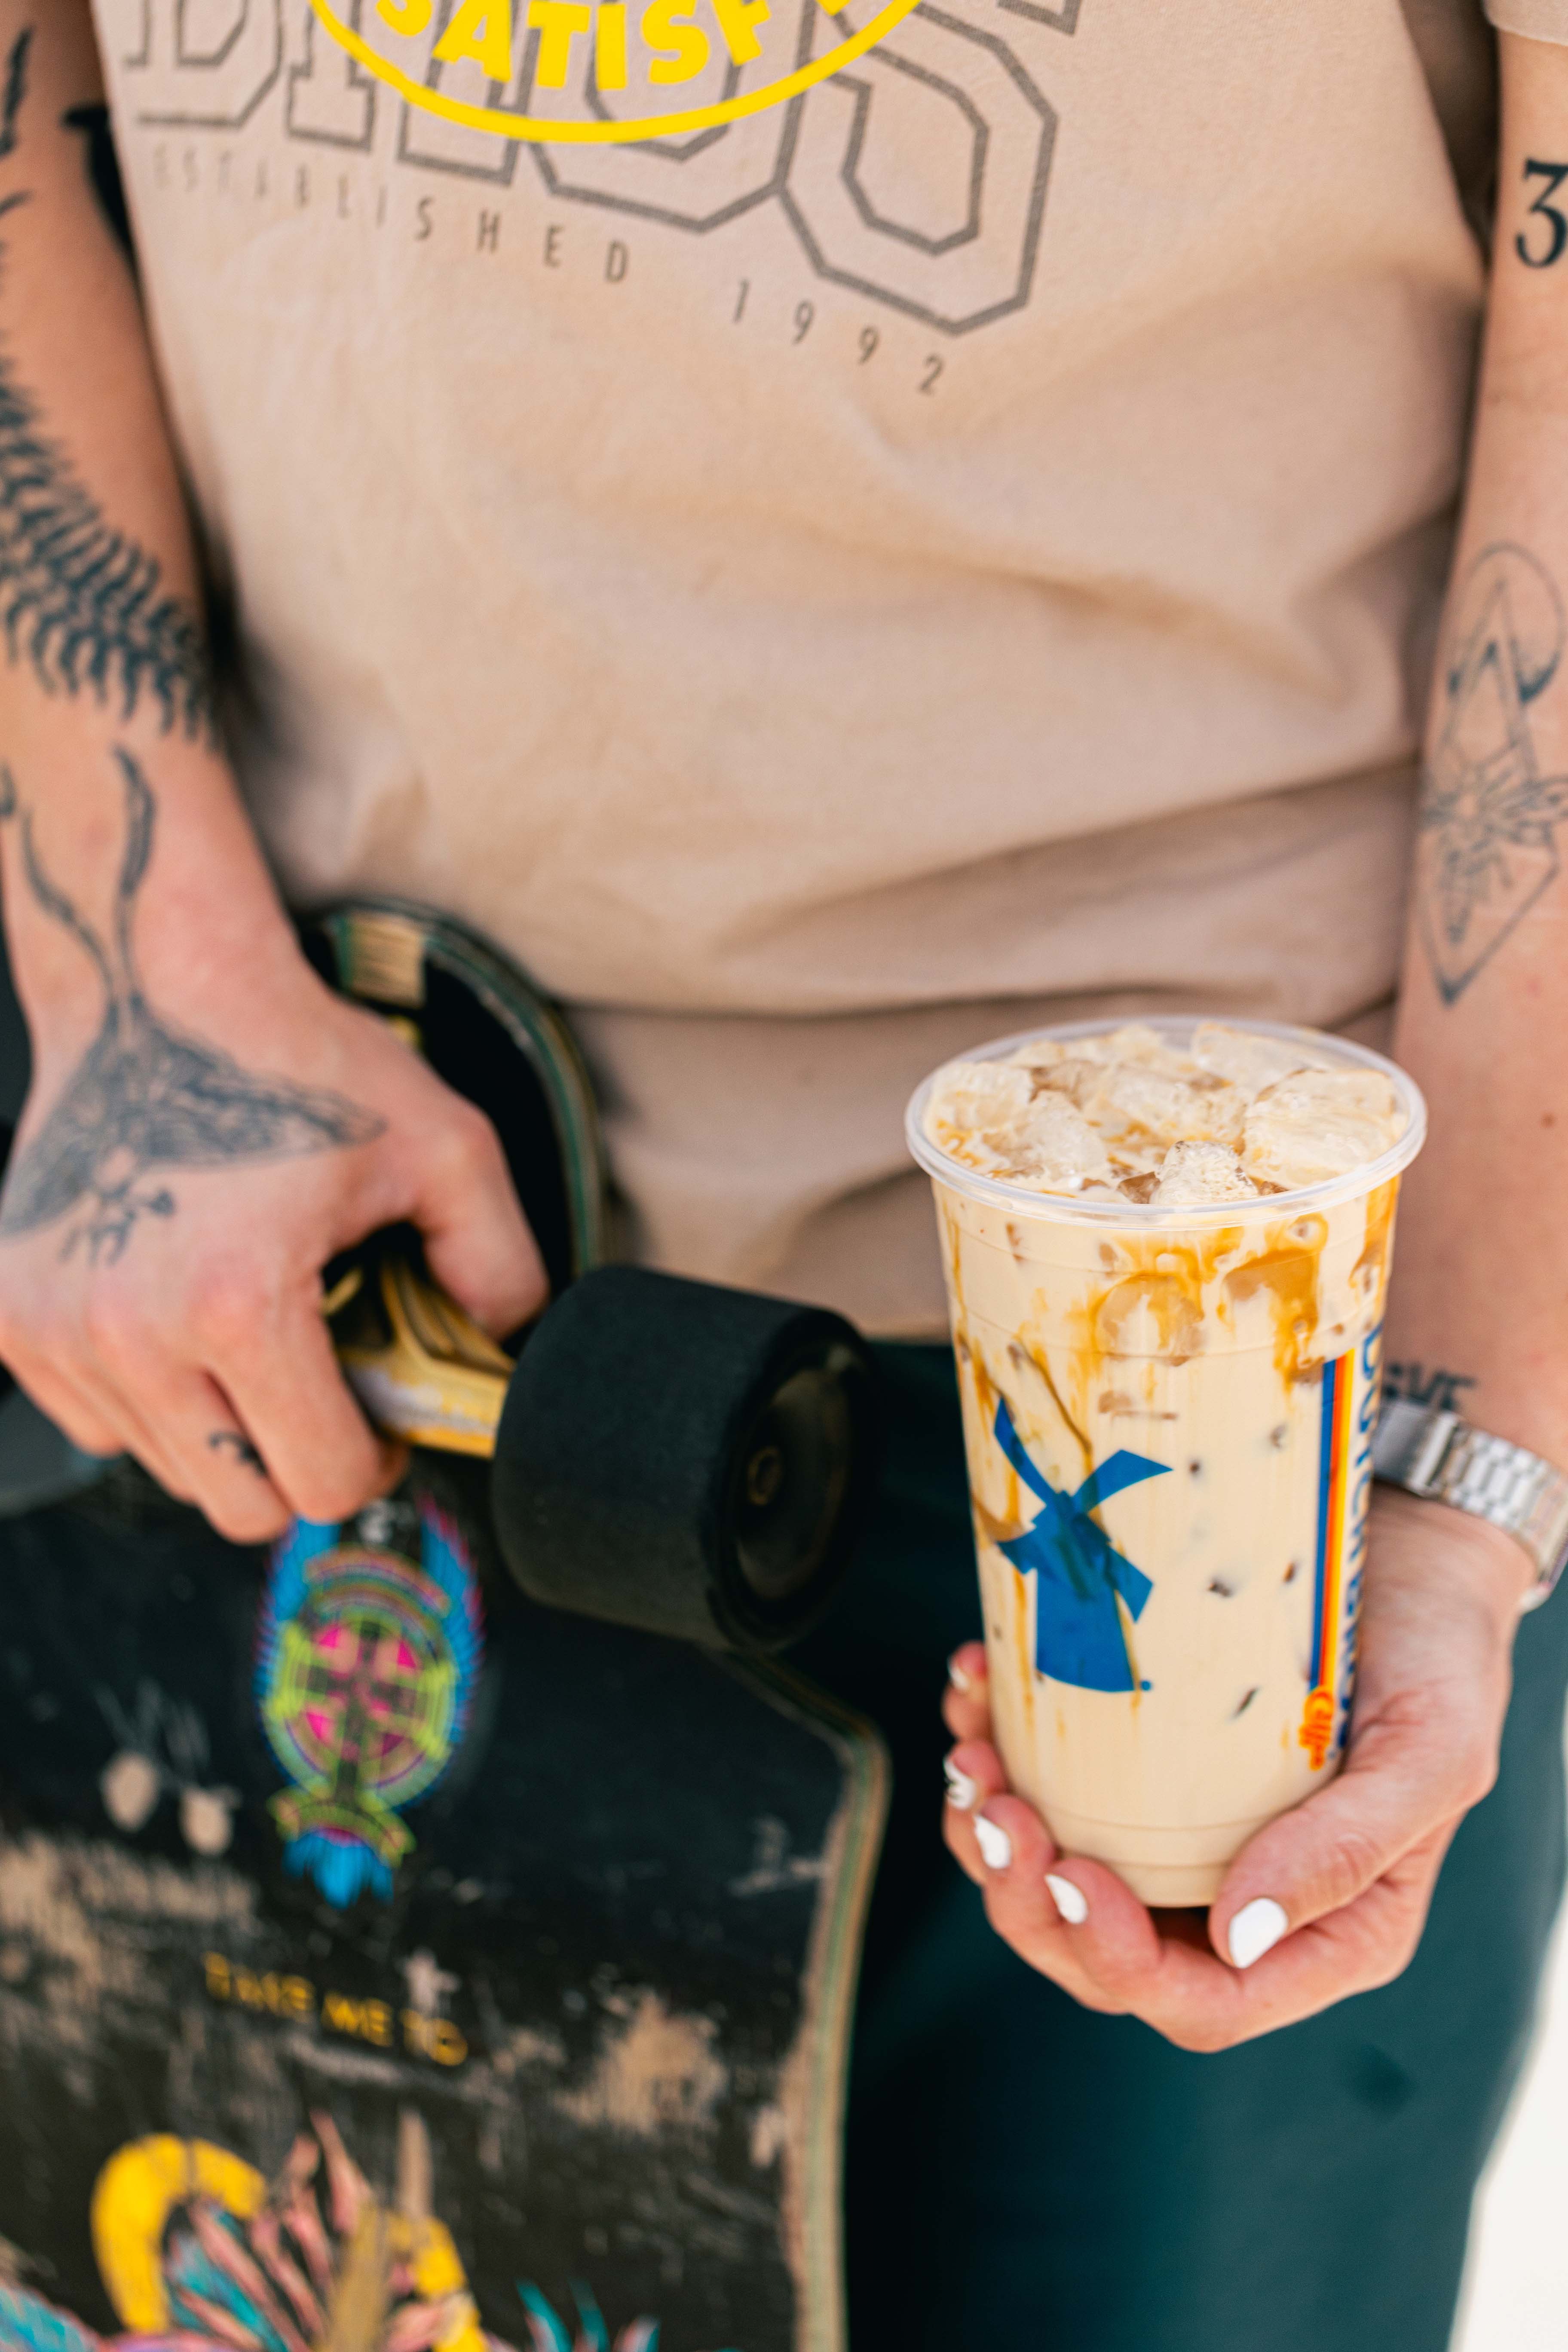 Try the Golden Eagle coffee featuring the caramel drizzle of your dreams. Dutch Bros Coffee San Bernardino (541)955-4700